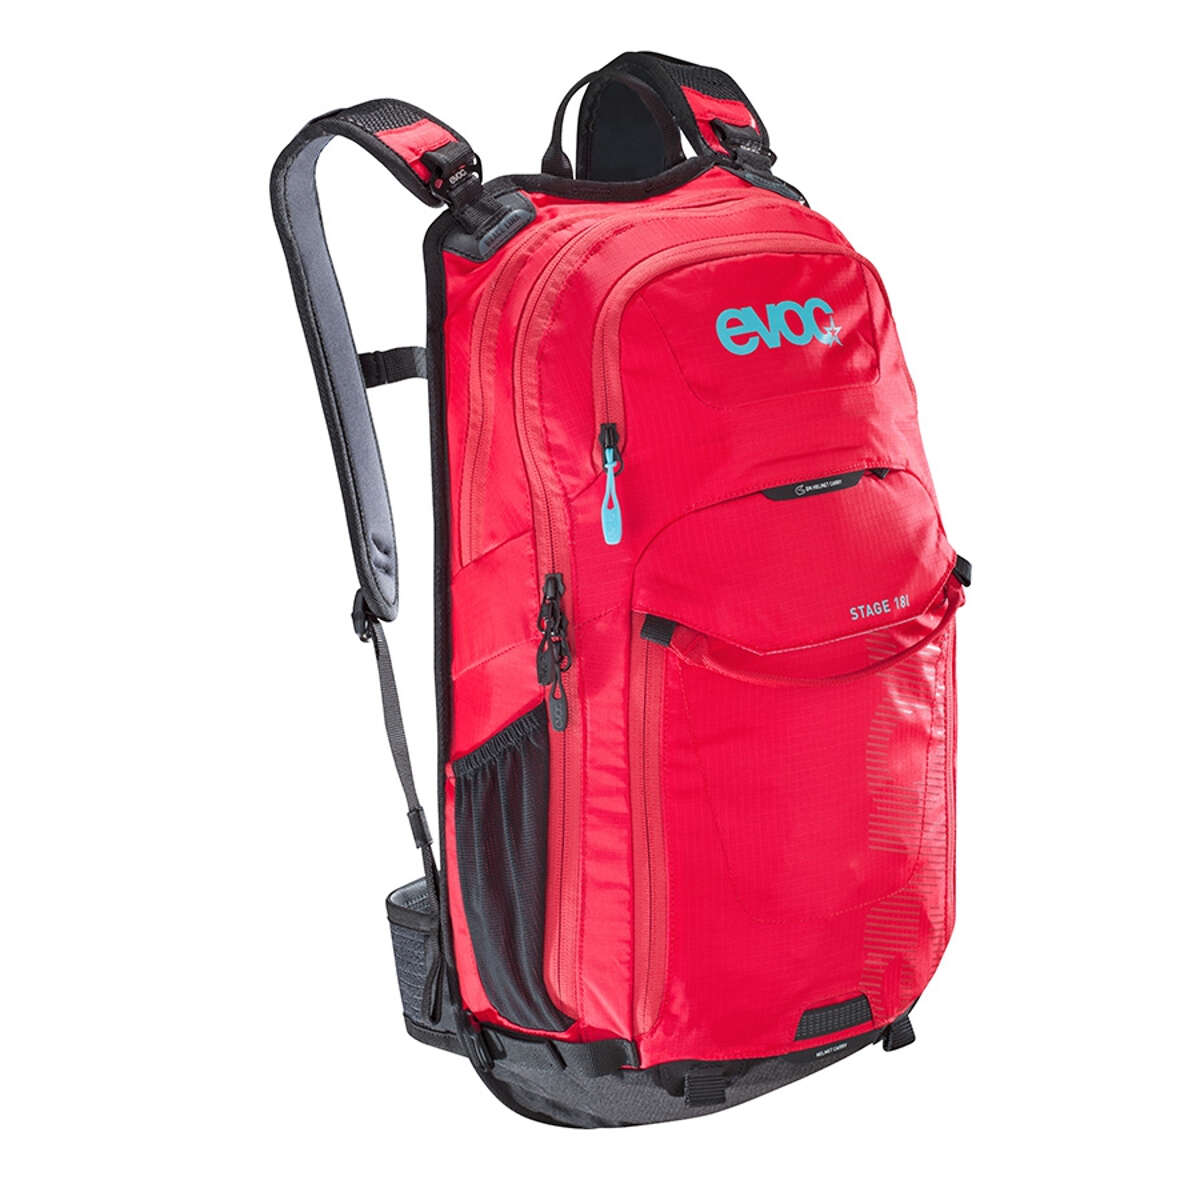 Evoc Backpack with Hydration System Compartment Stage Red, 18 Liter